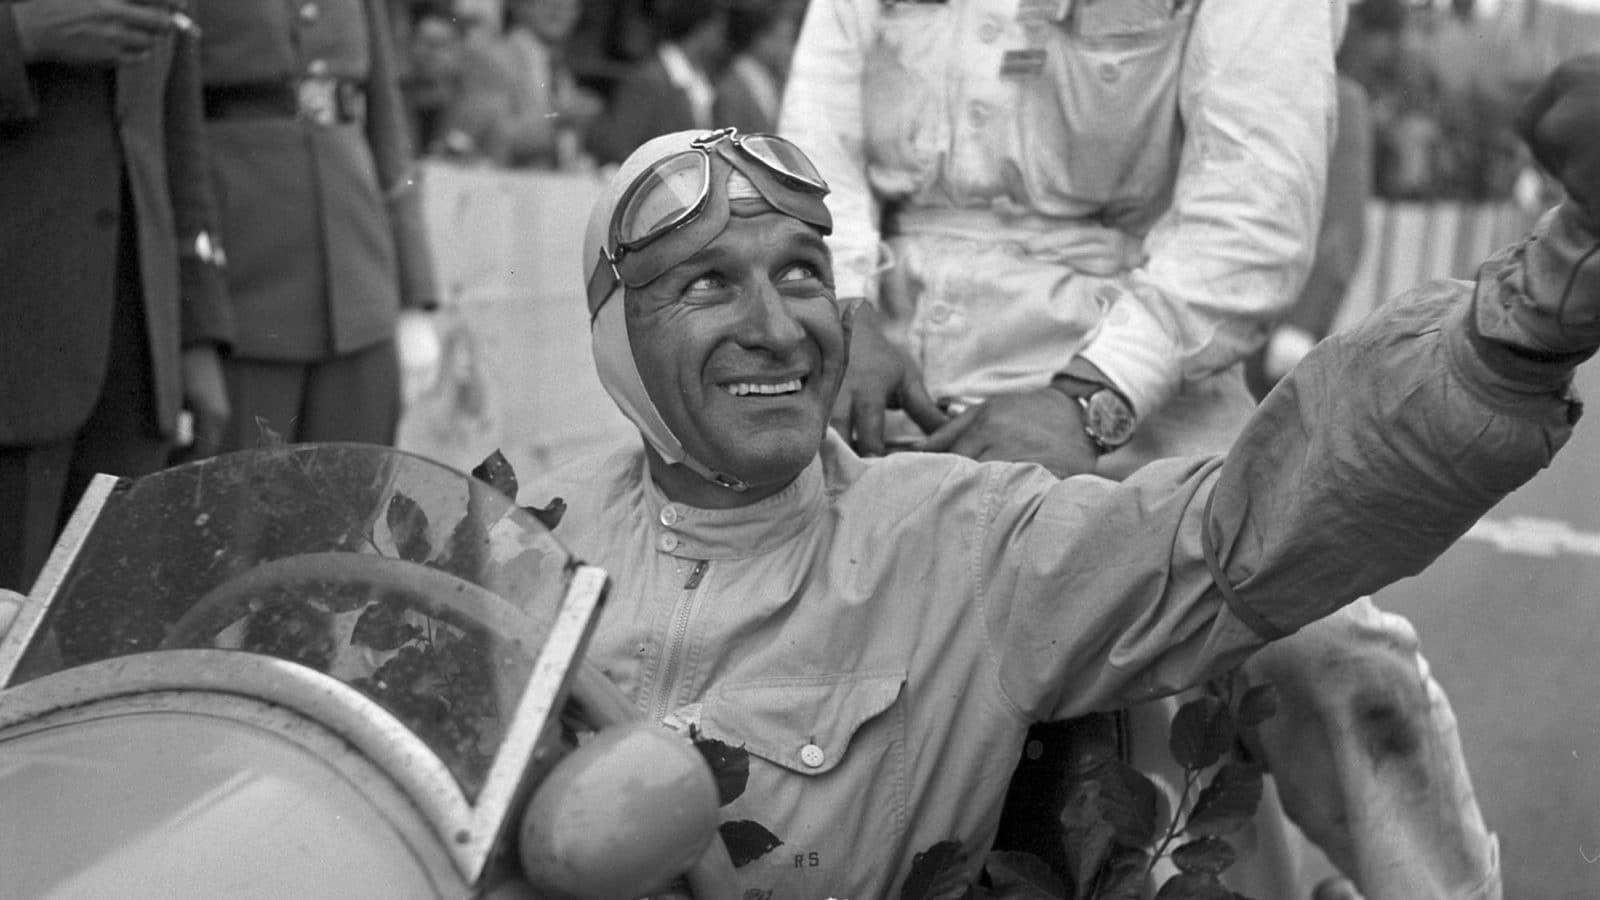 Raymond Sommer, French racing driver, ca. 1950 (Photo by RDB/ullstein bild via Getty Images)